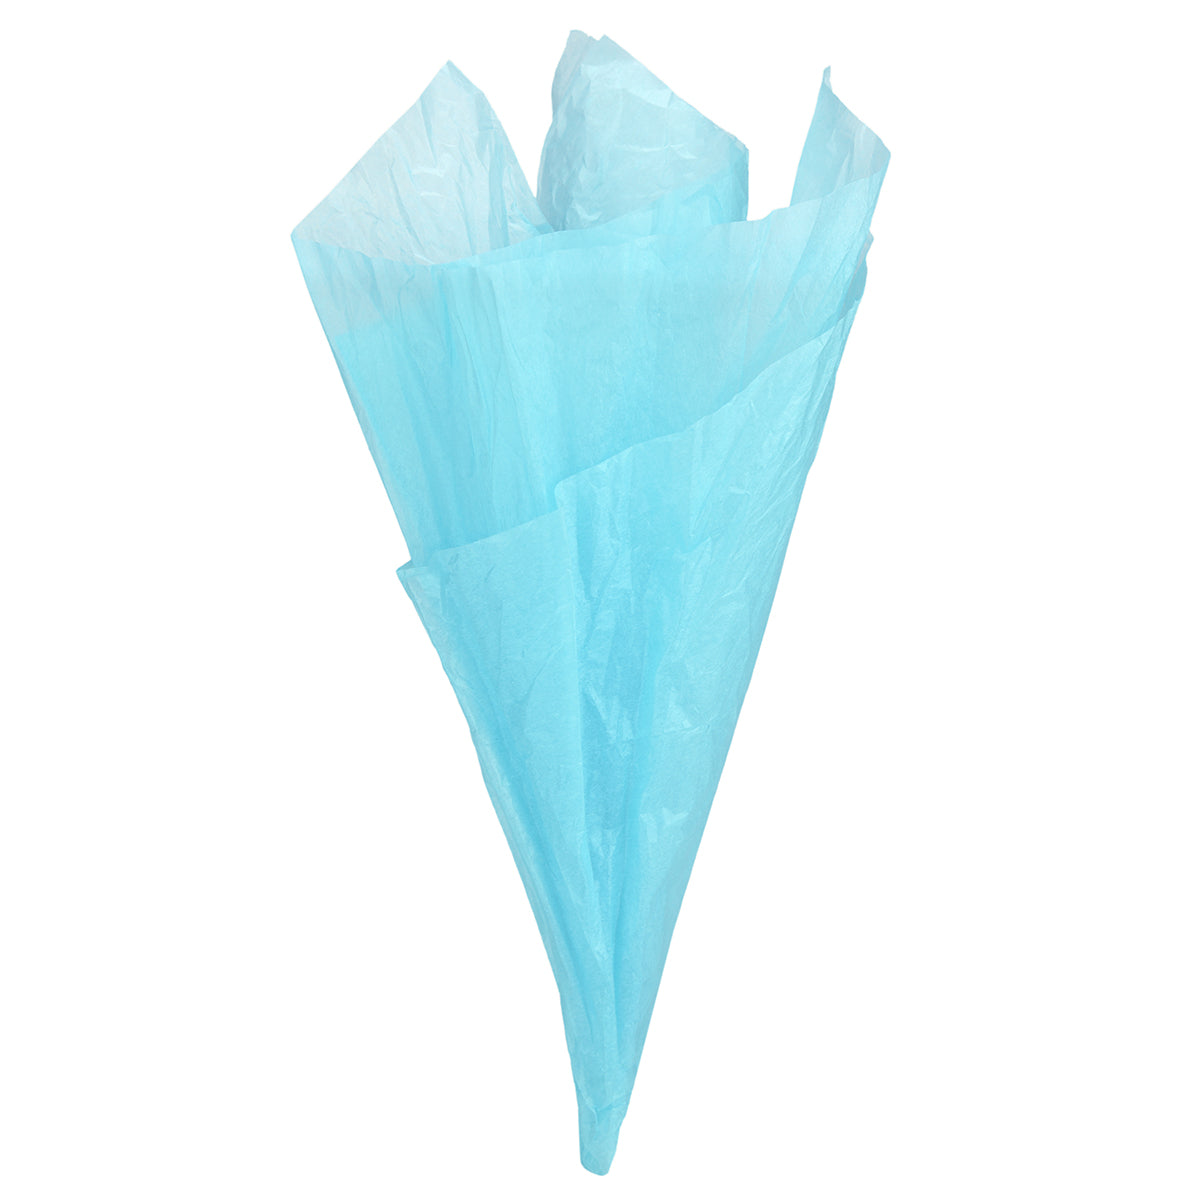 Displaying of a light blue tissue paper in ice cream cone shape